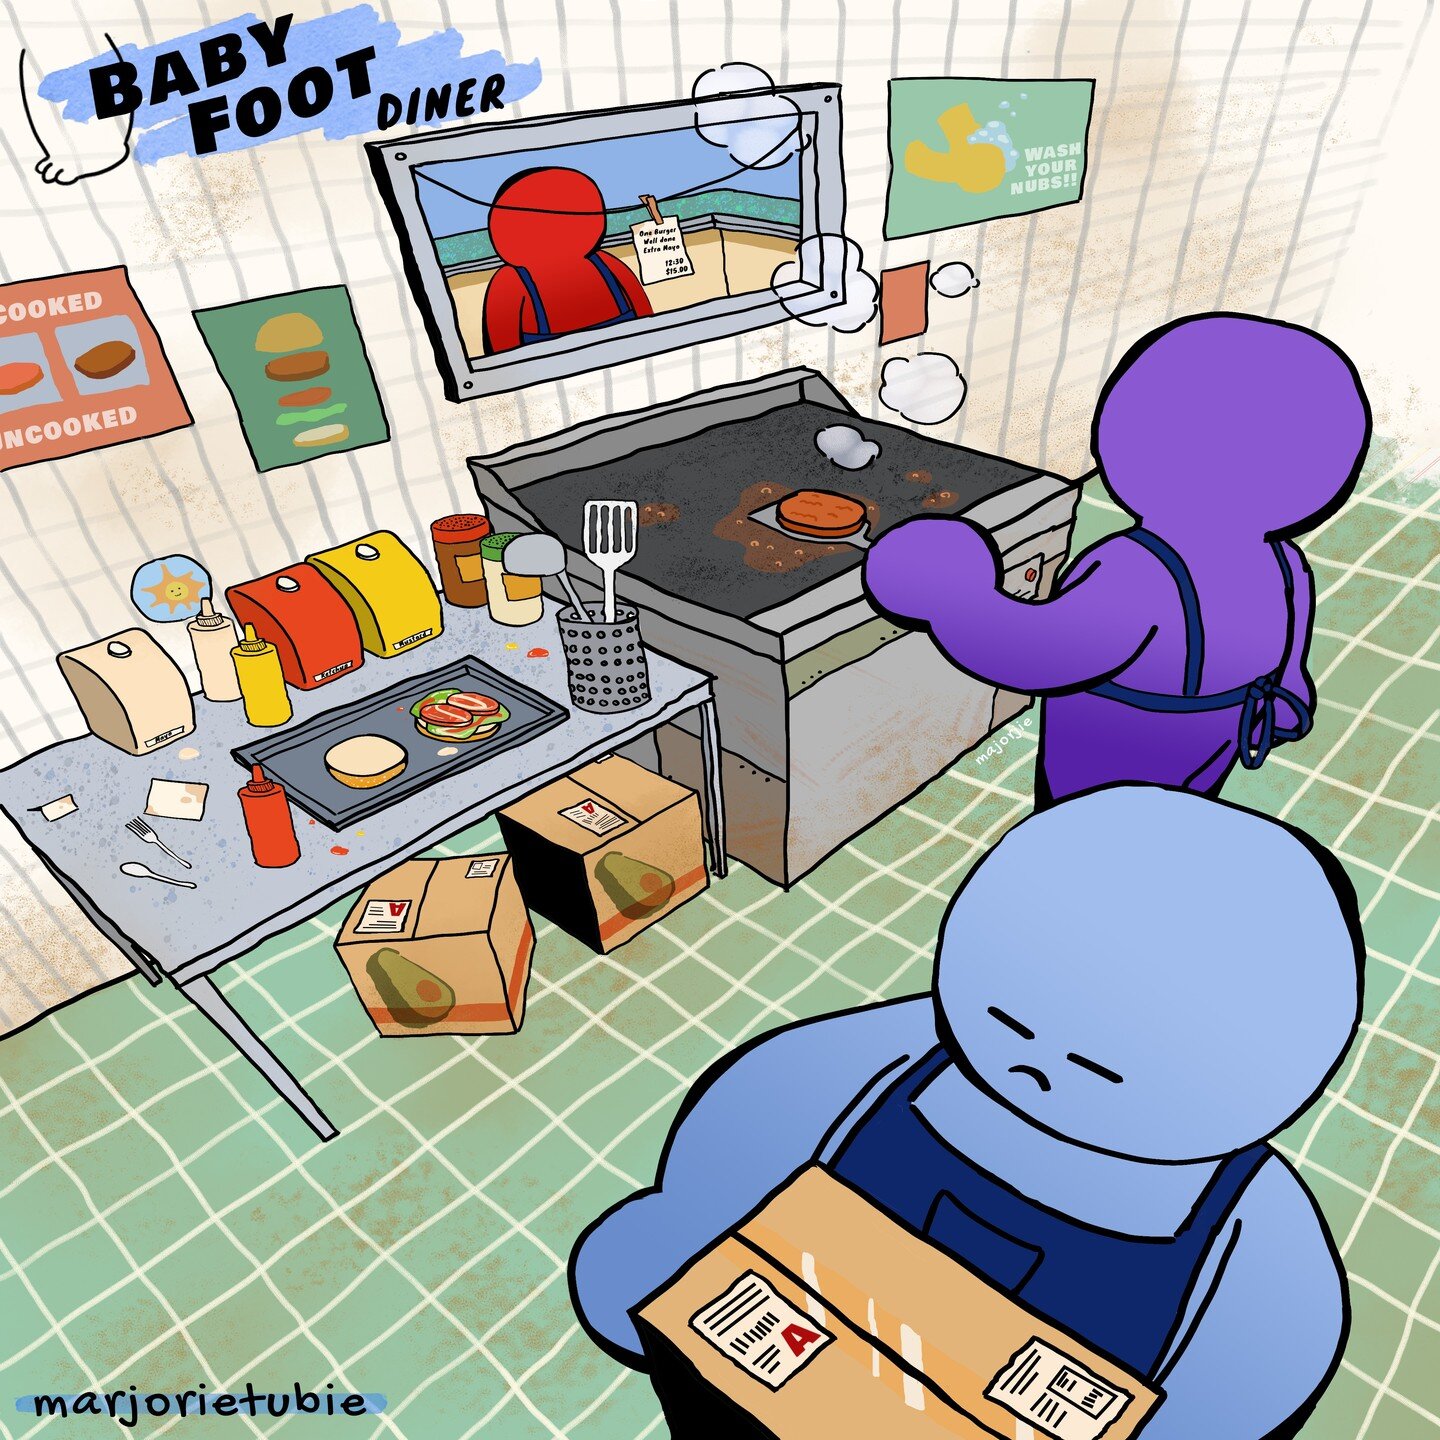 Filling Orders -- Play Baby Foot Diner!

https://majorjie.itch.io/baby-foot-diner

#indiegame #games #babyfootdiner #art #illustration